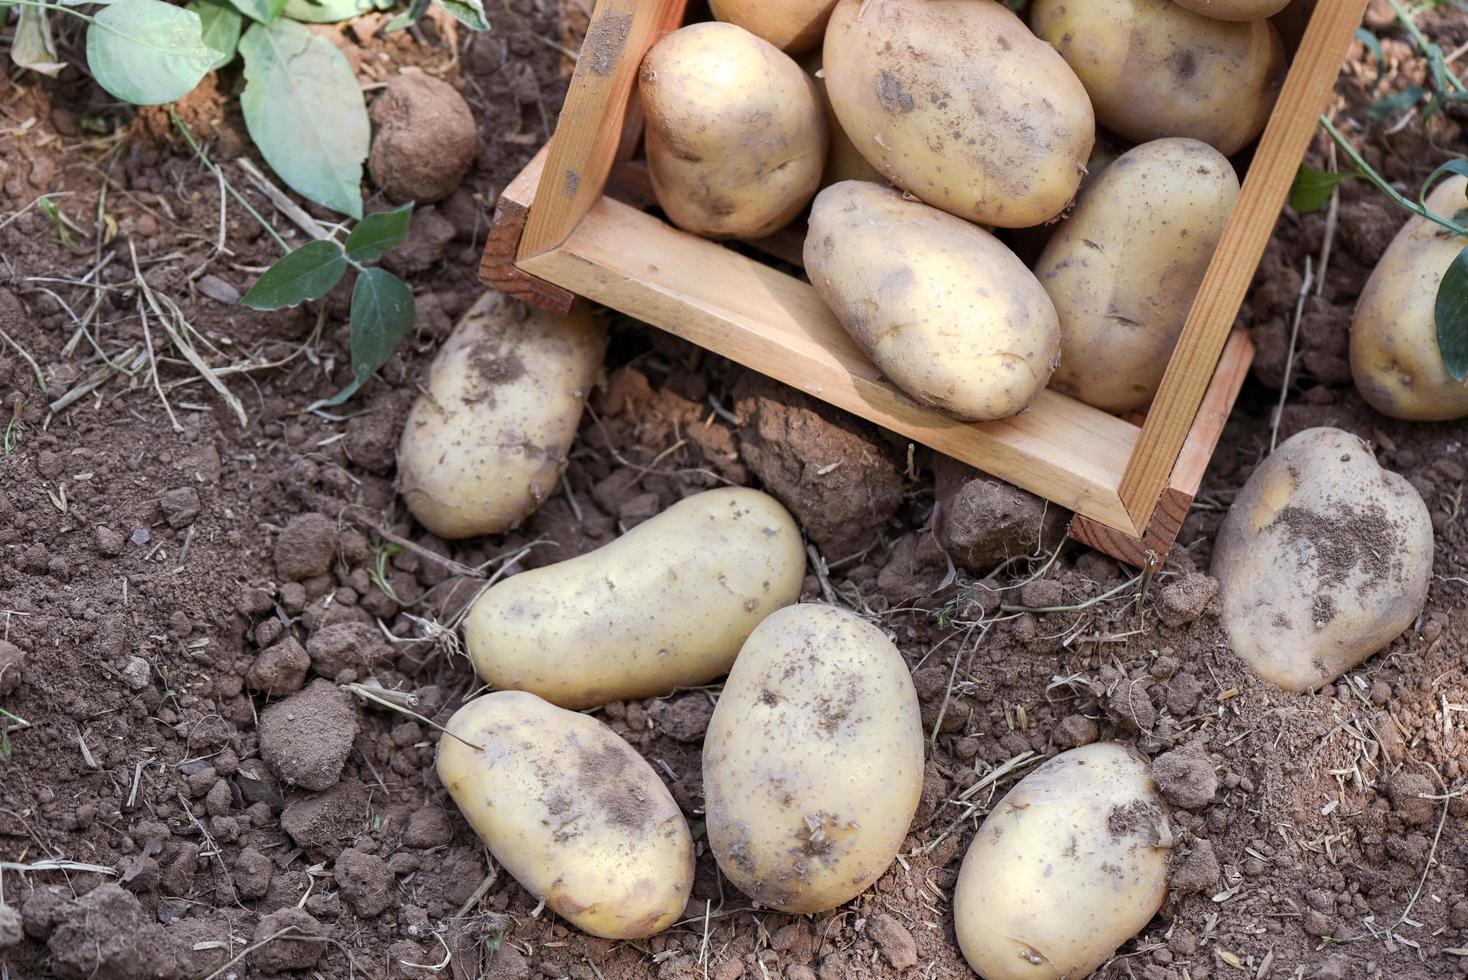 Fresh potato plant, harvest of ripe potatoes in wooden box agricultural products from potato field photo